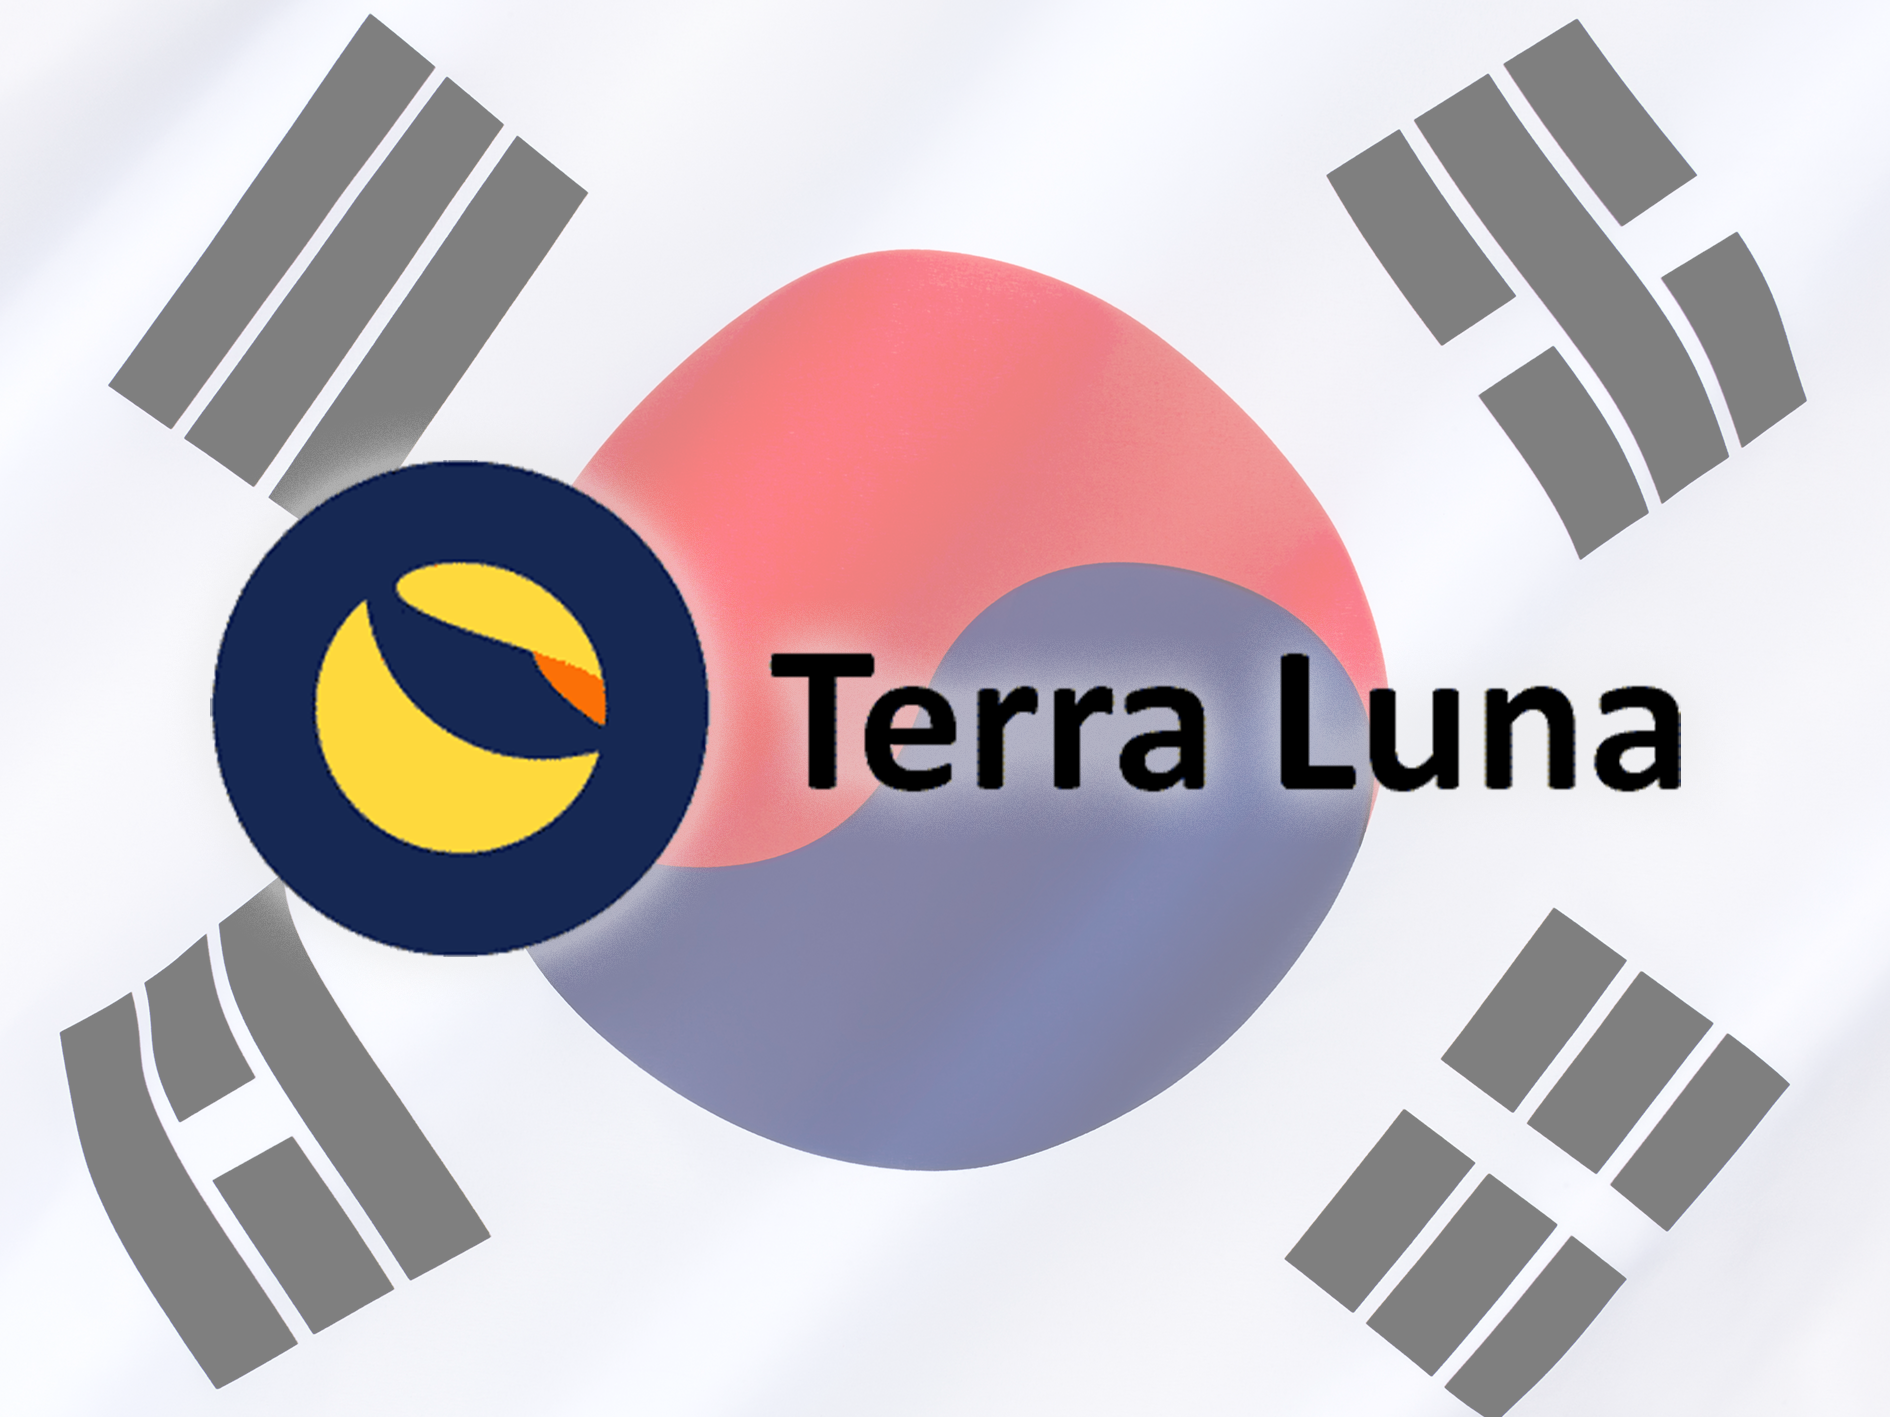 South Korean authorities cite LUNA debacle to call for speedier crypto oversight